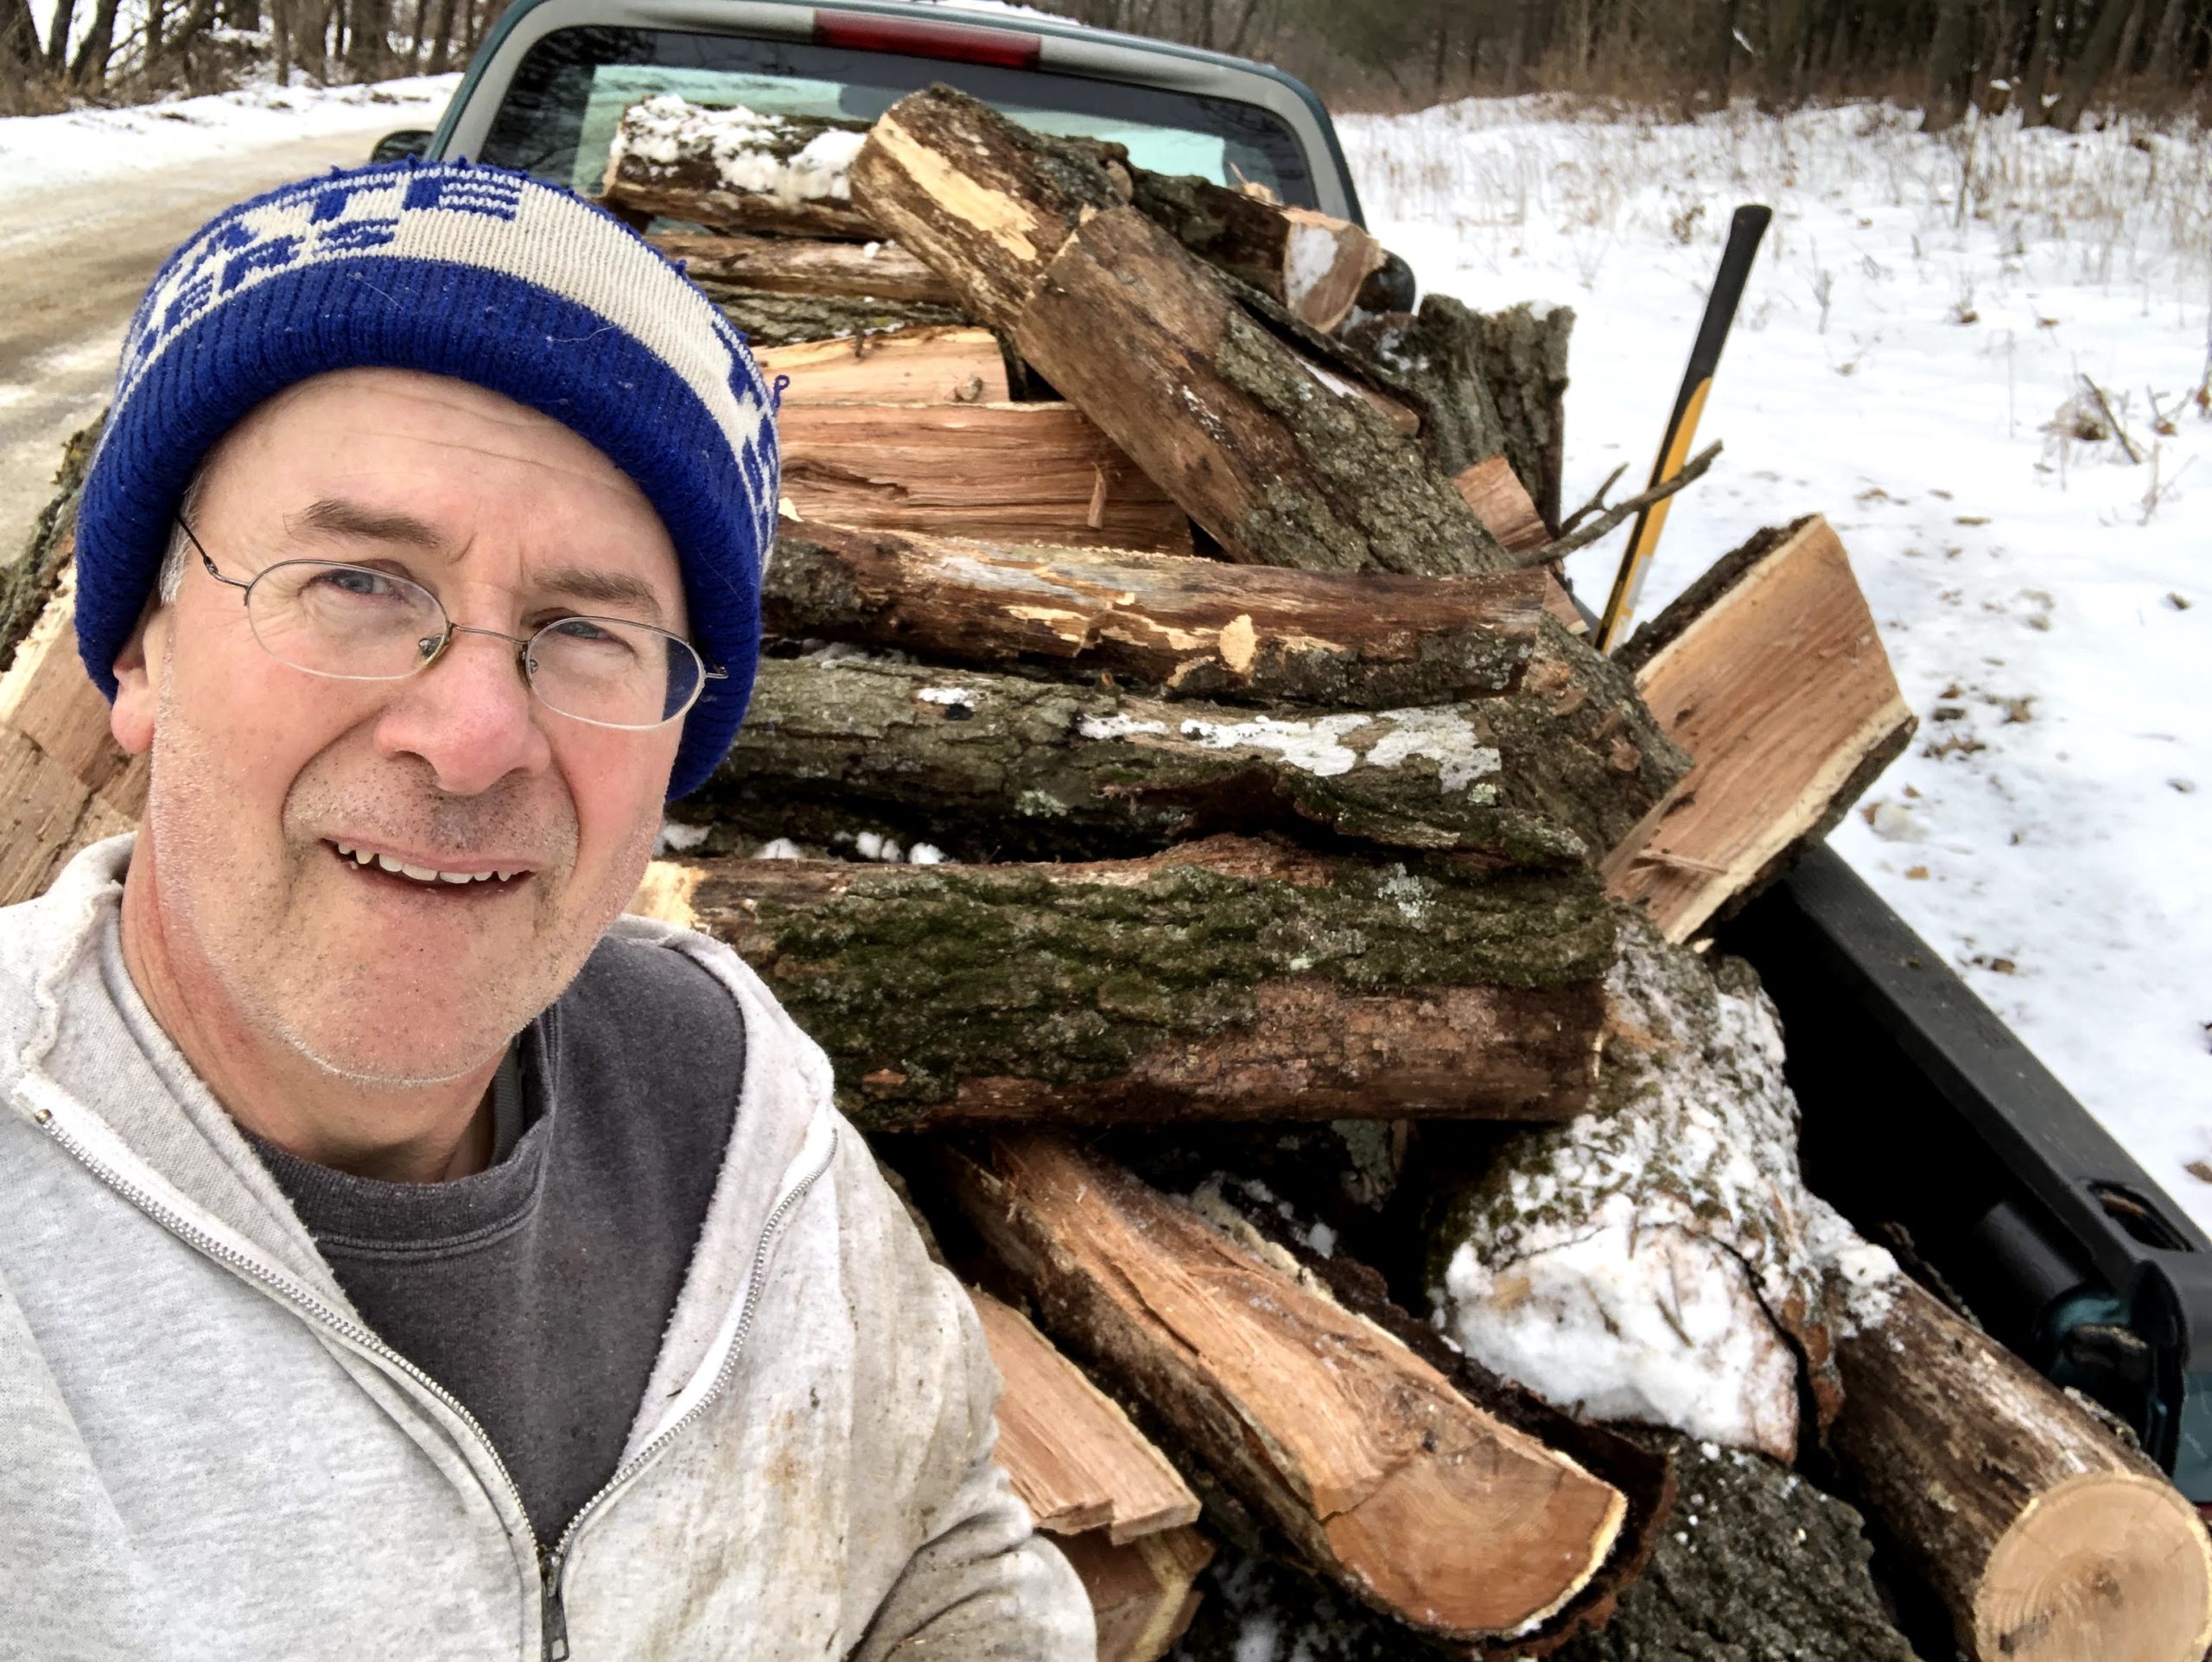 Author Chris Hardie cuts wood all winter to heat his house. (Courtesy of Chris Hardie)